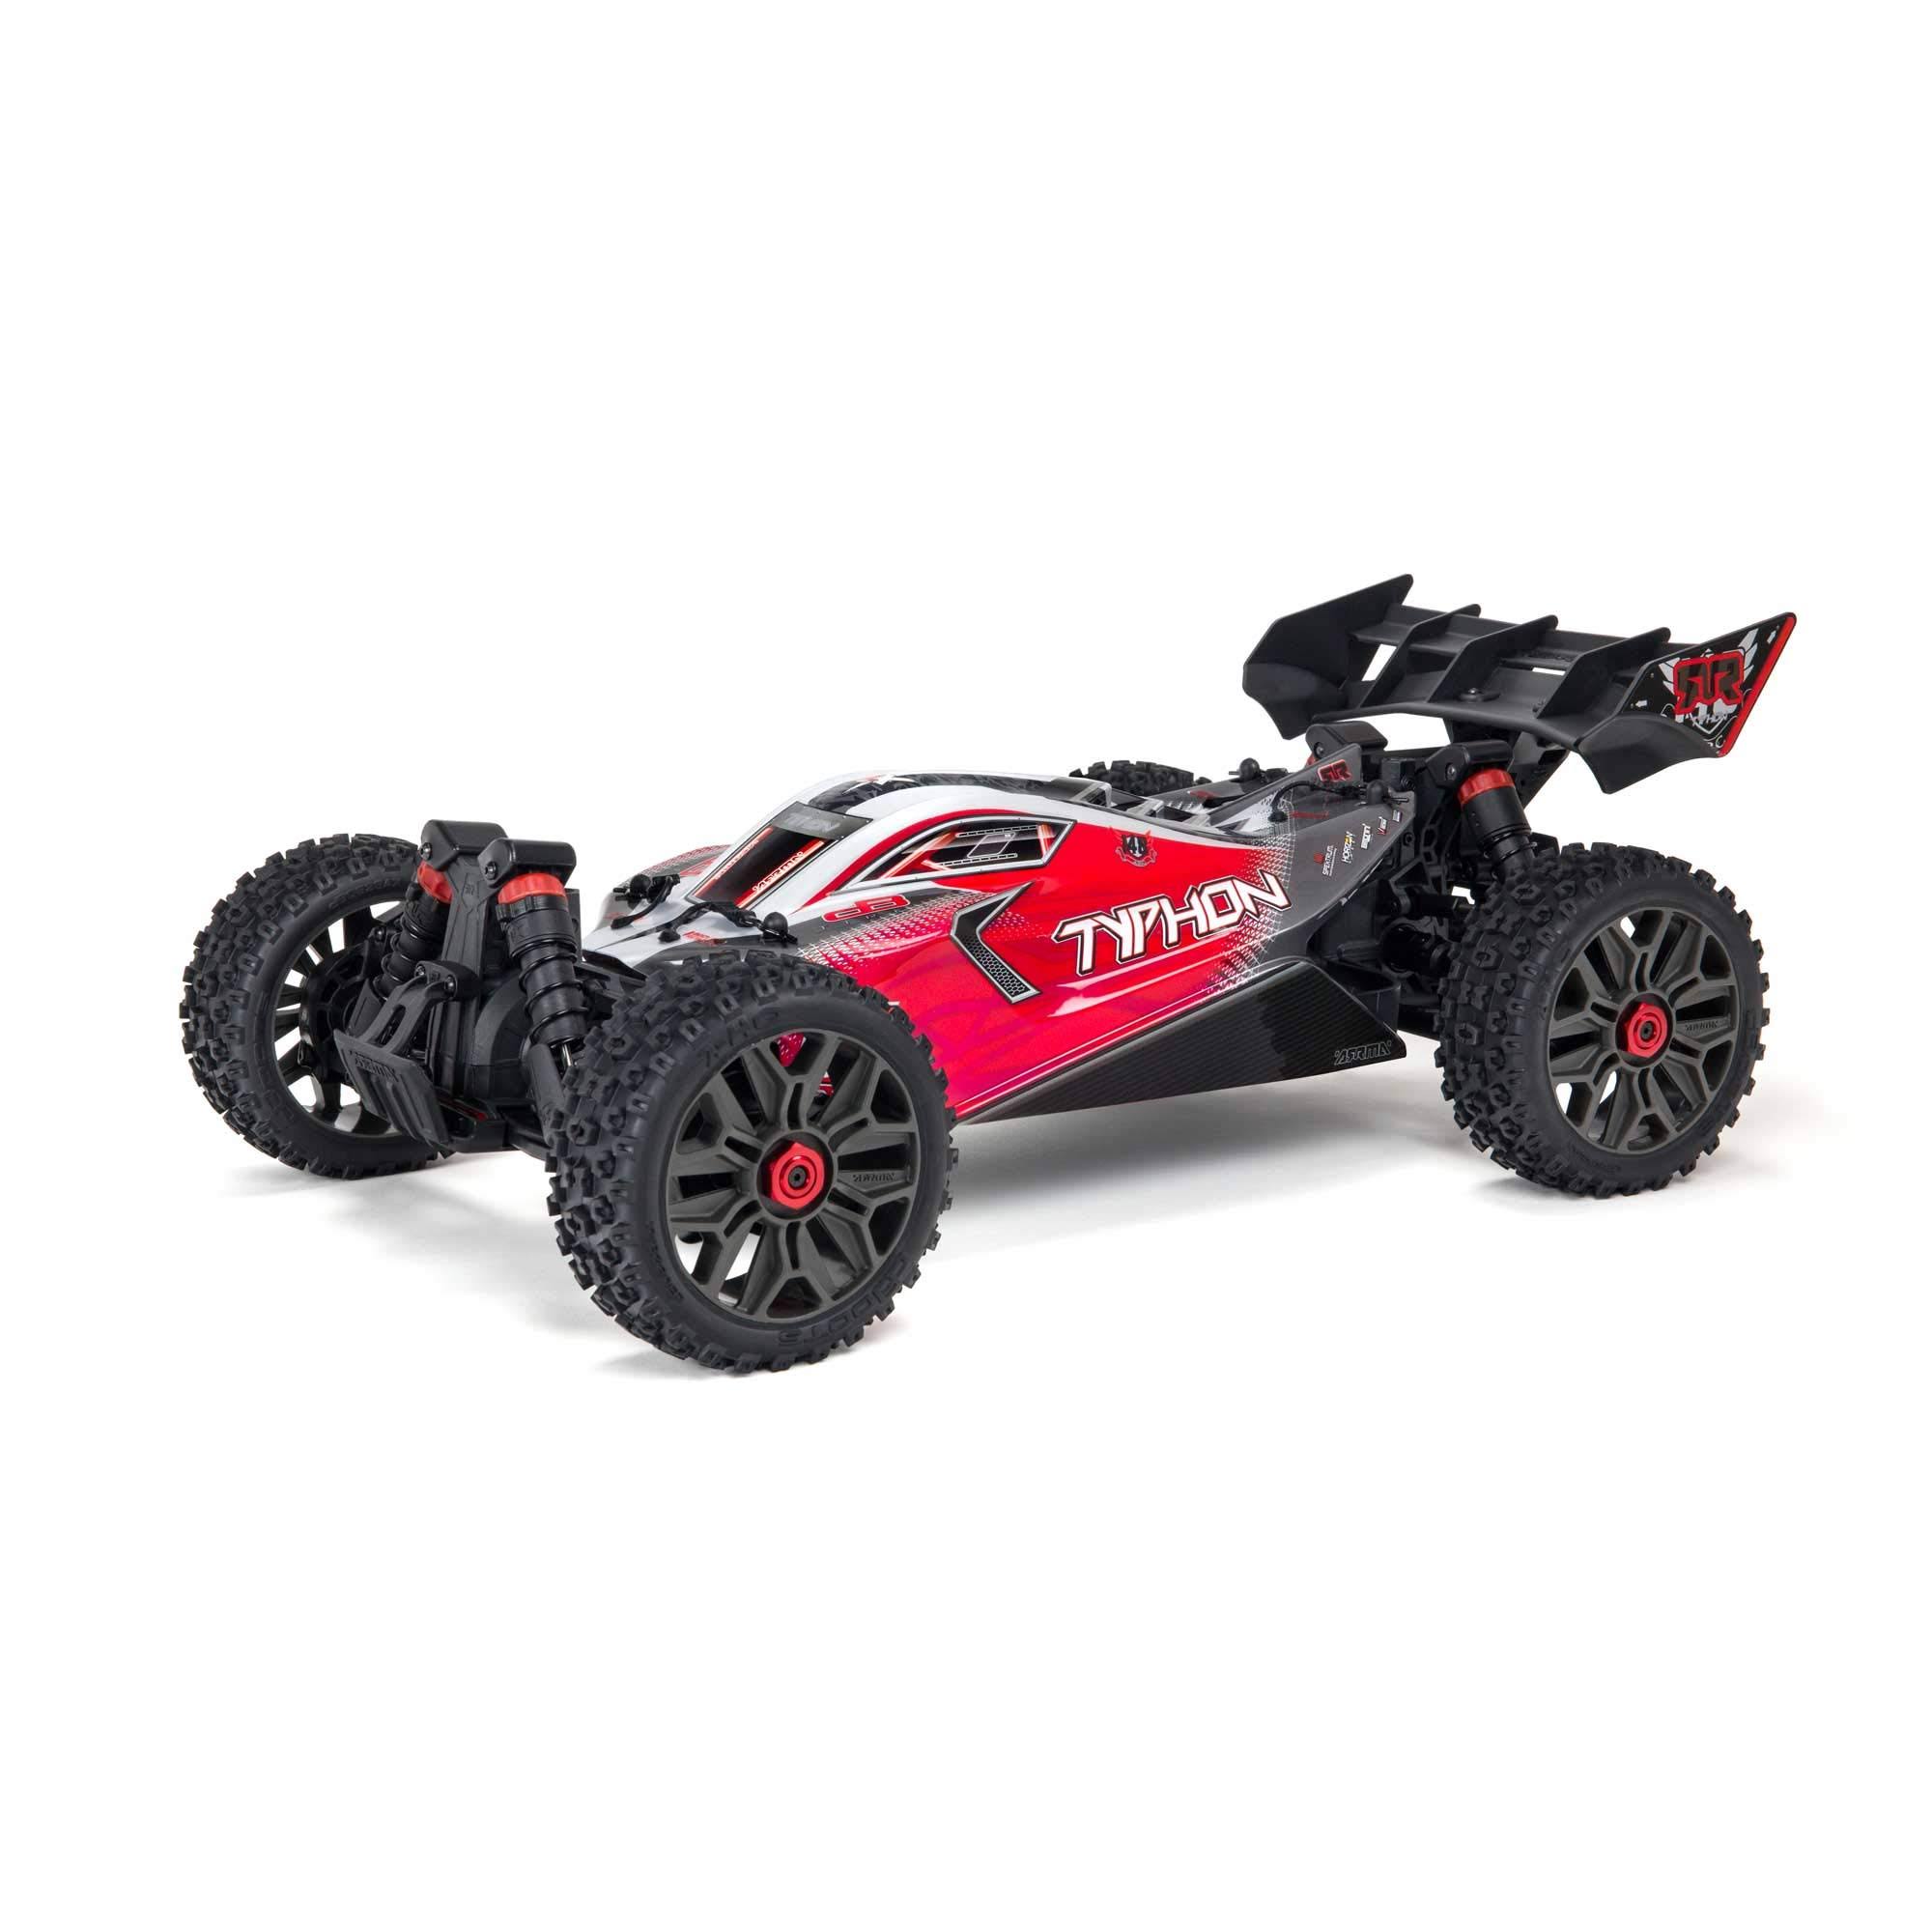 ARRMA ARA 4306V3 TYPHON 4X4 3S BLX Brushless 1/8th 4wd Buggy Red